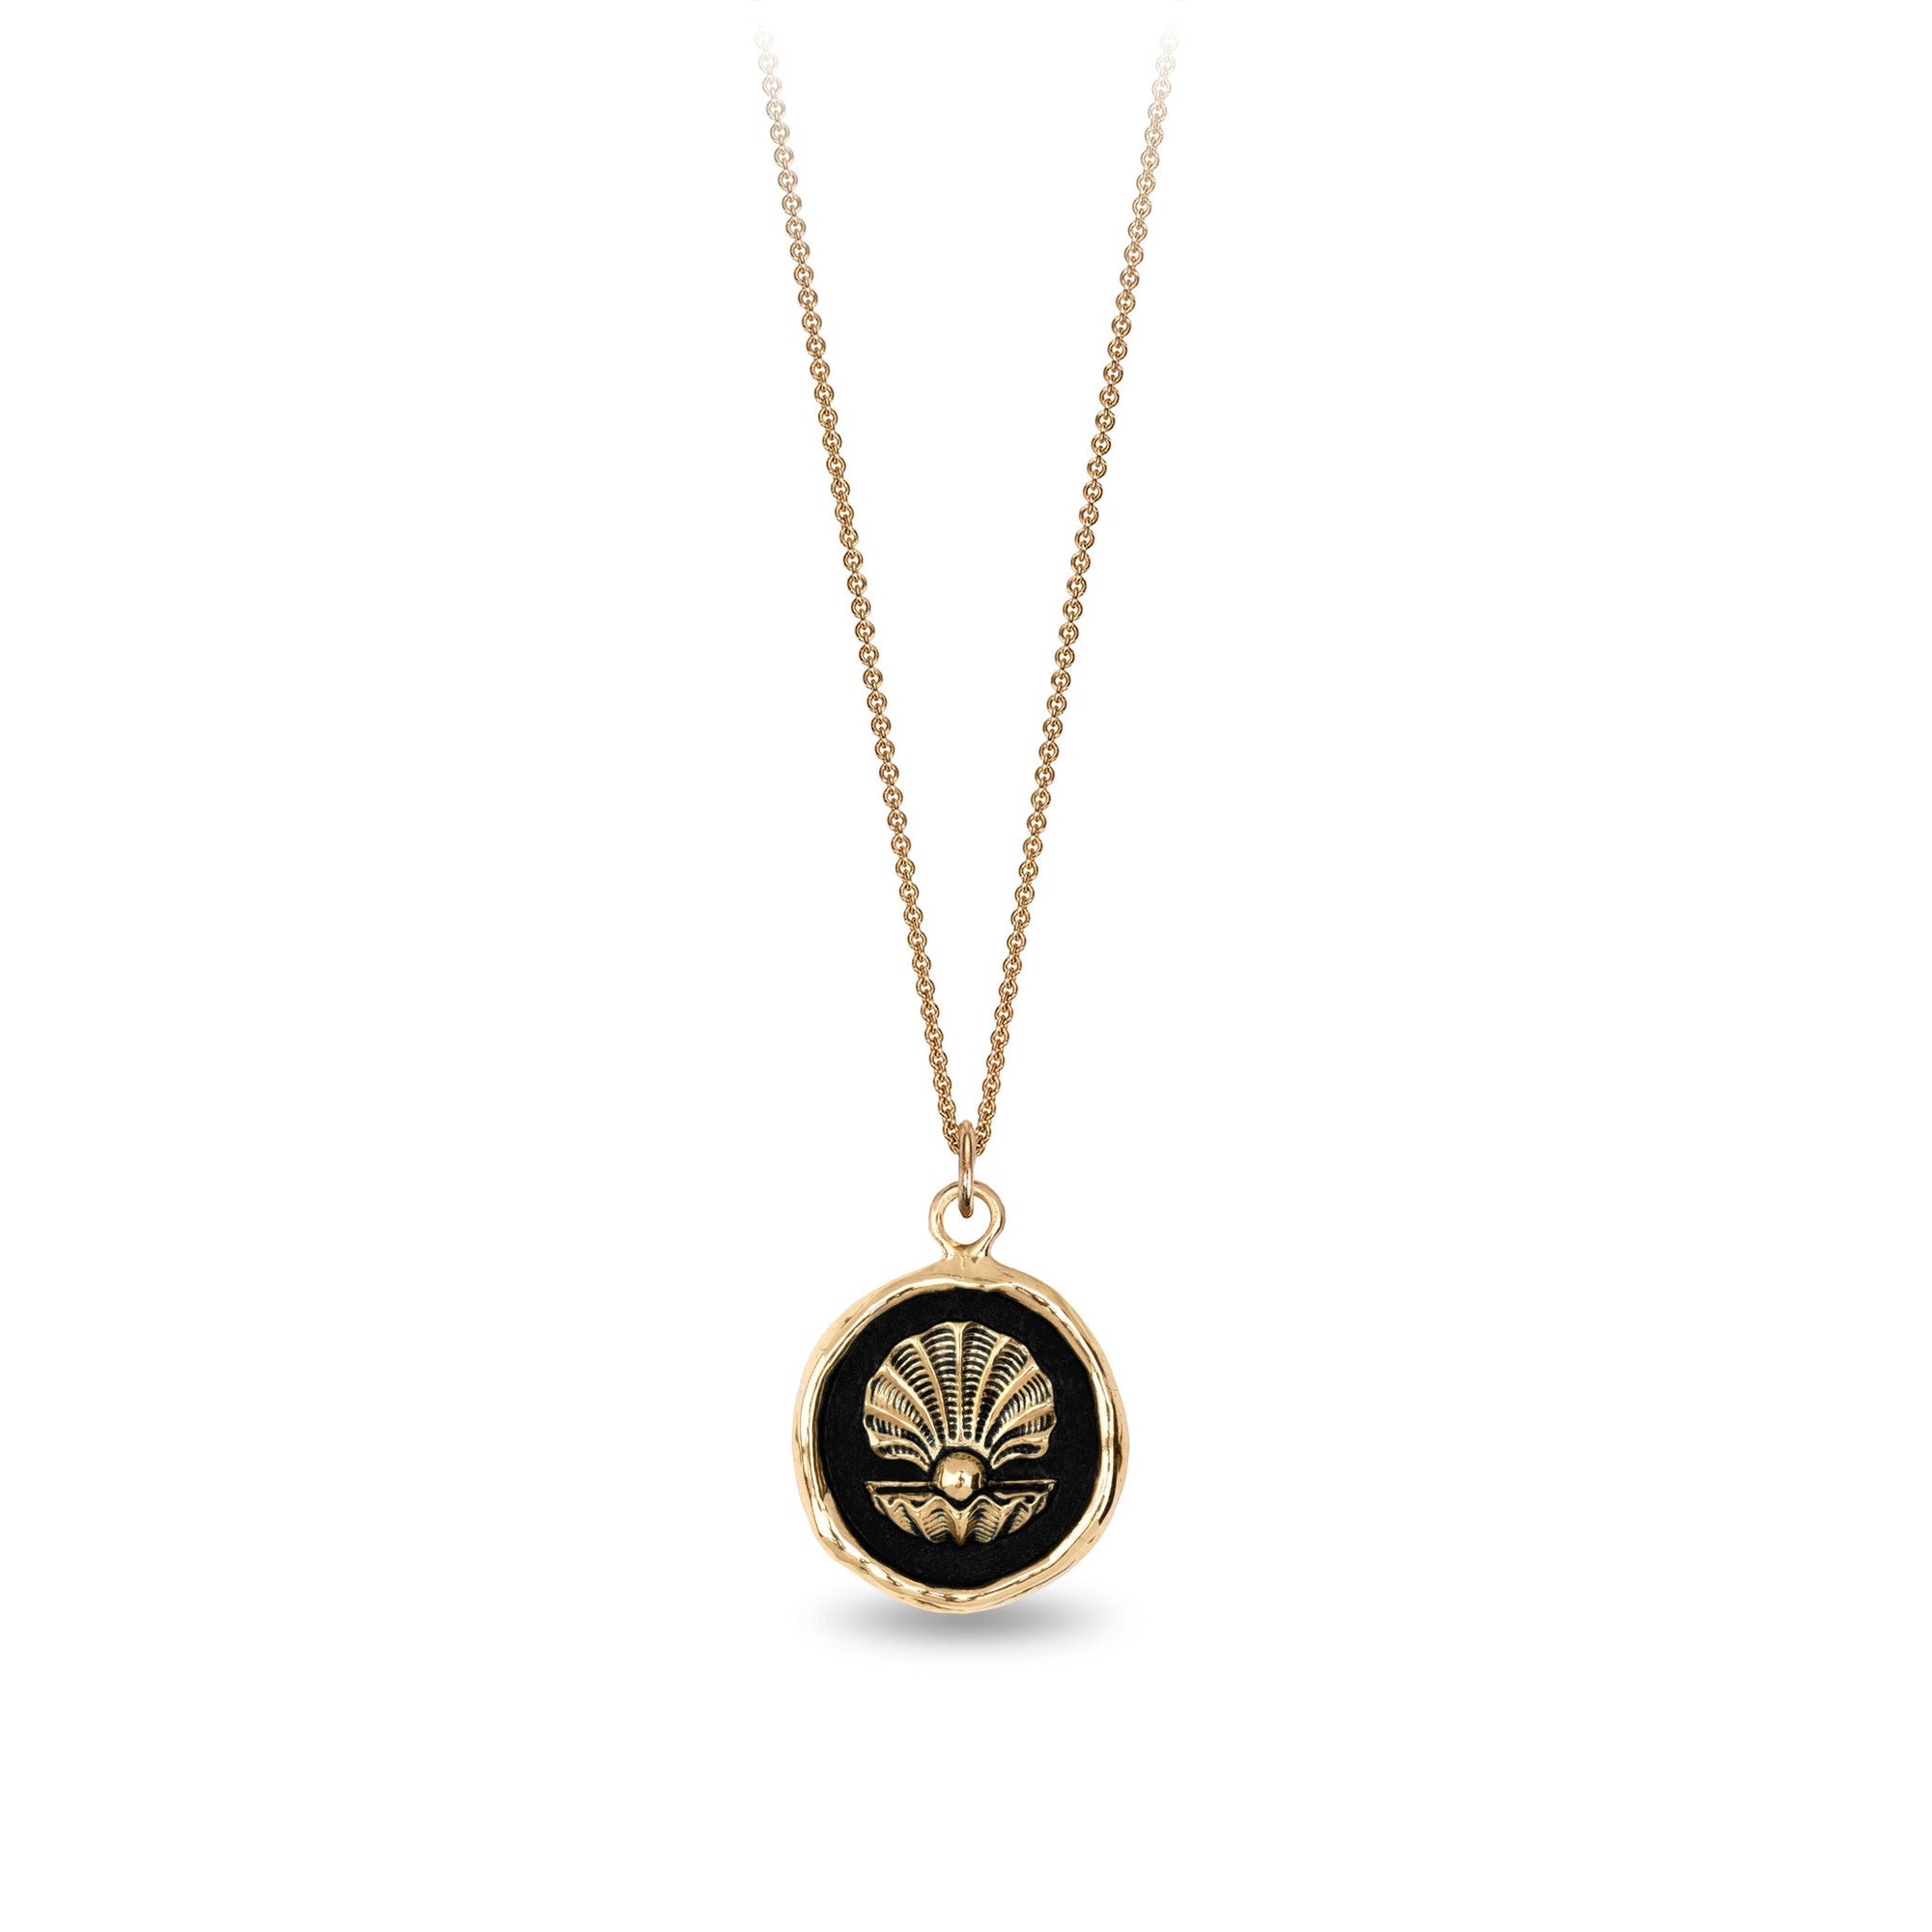 The World is Your Oyster 14K Gold Talisman